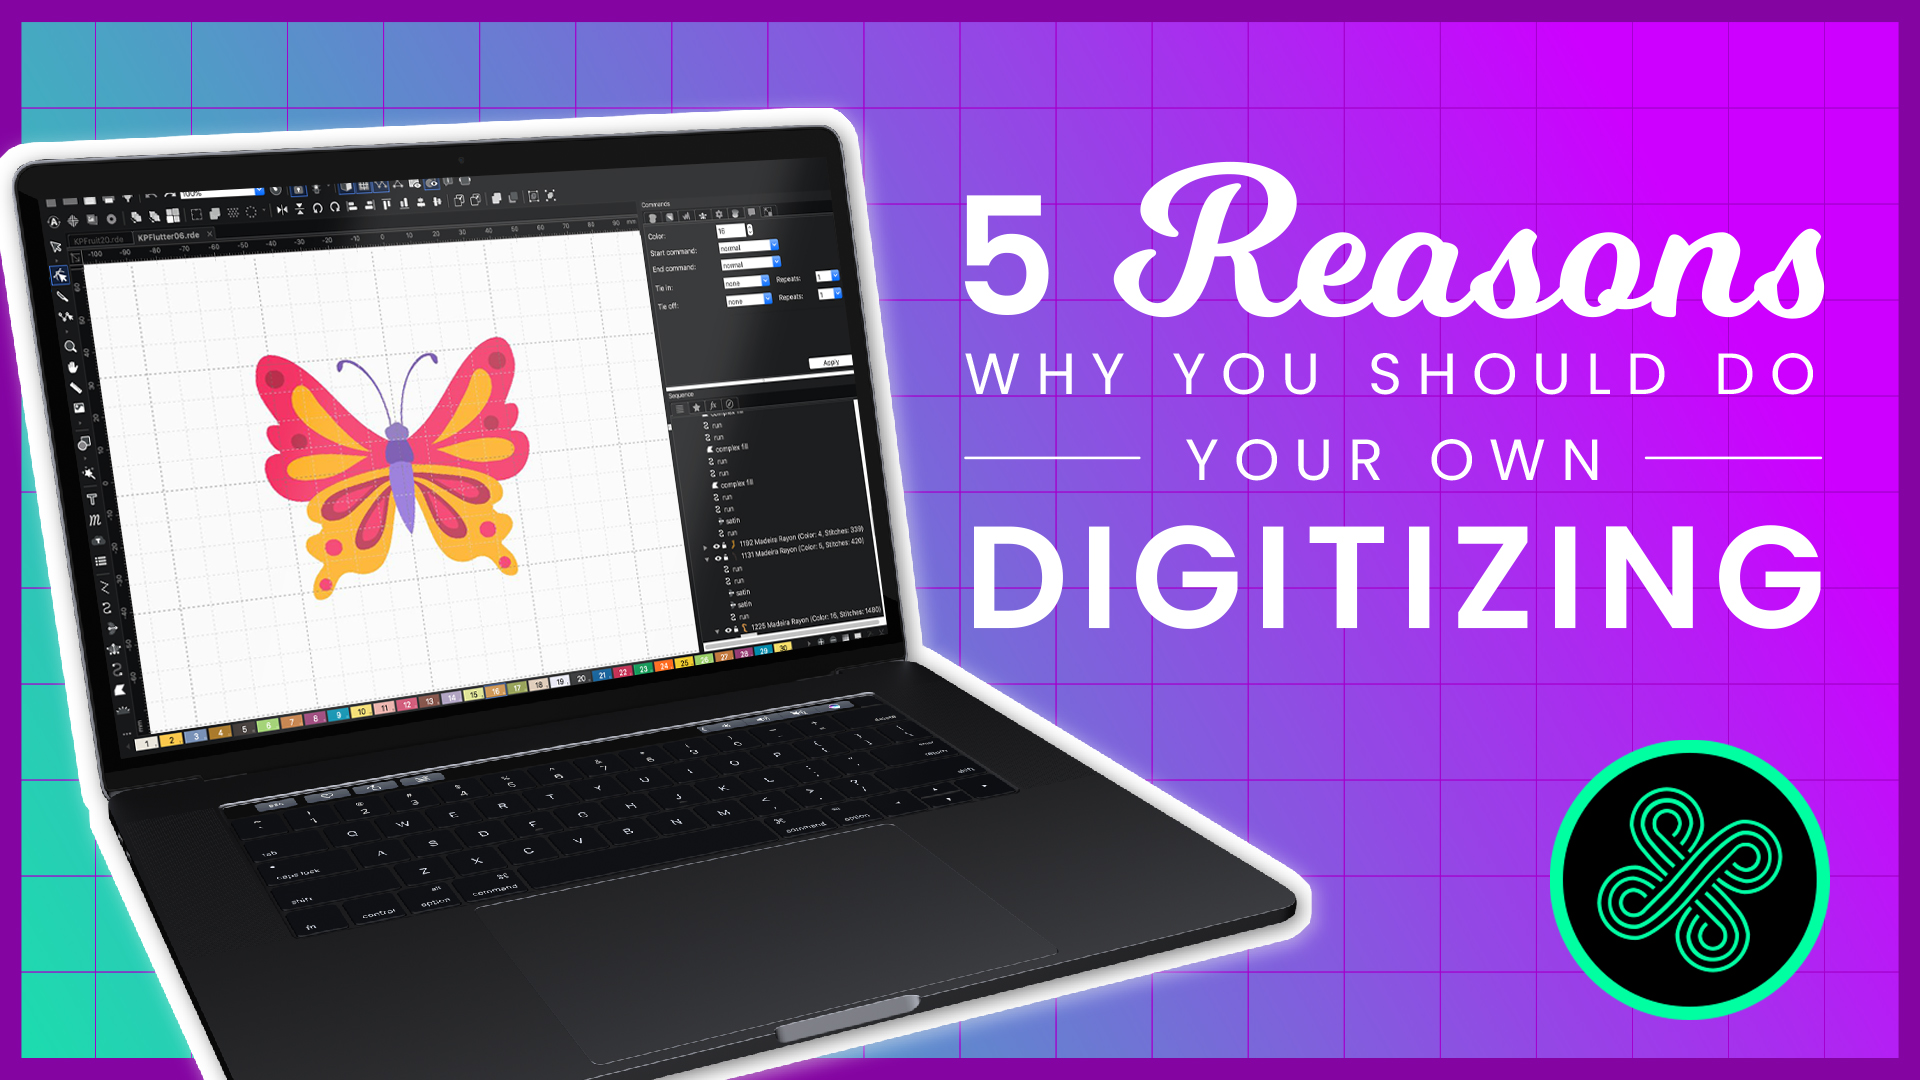 5 Reasons Why You Should Do Your Own Digitizing – Even If You're a Beginner  – Ricoma Blog